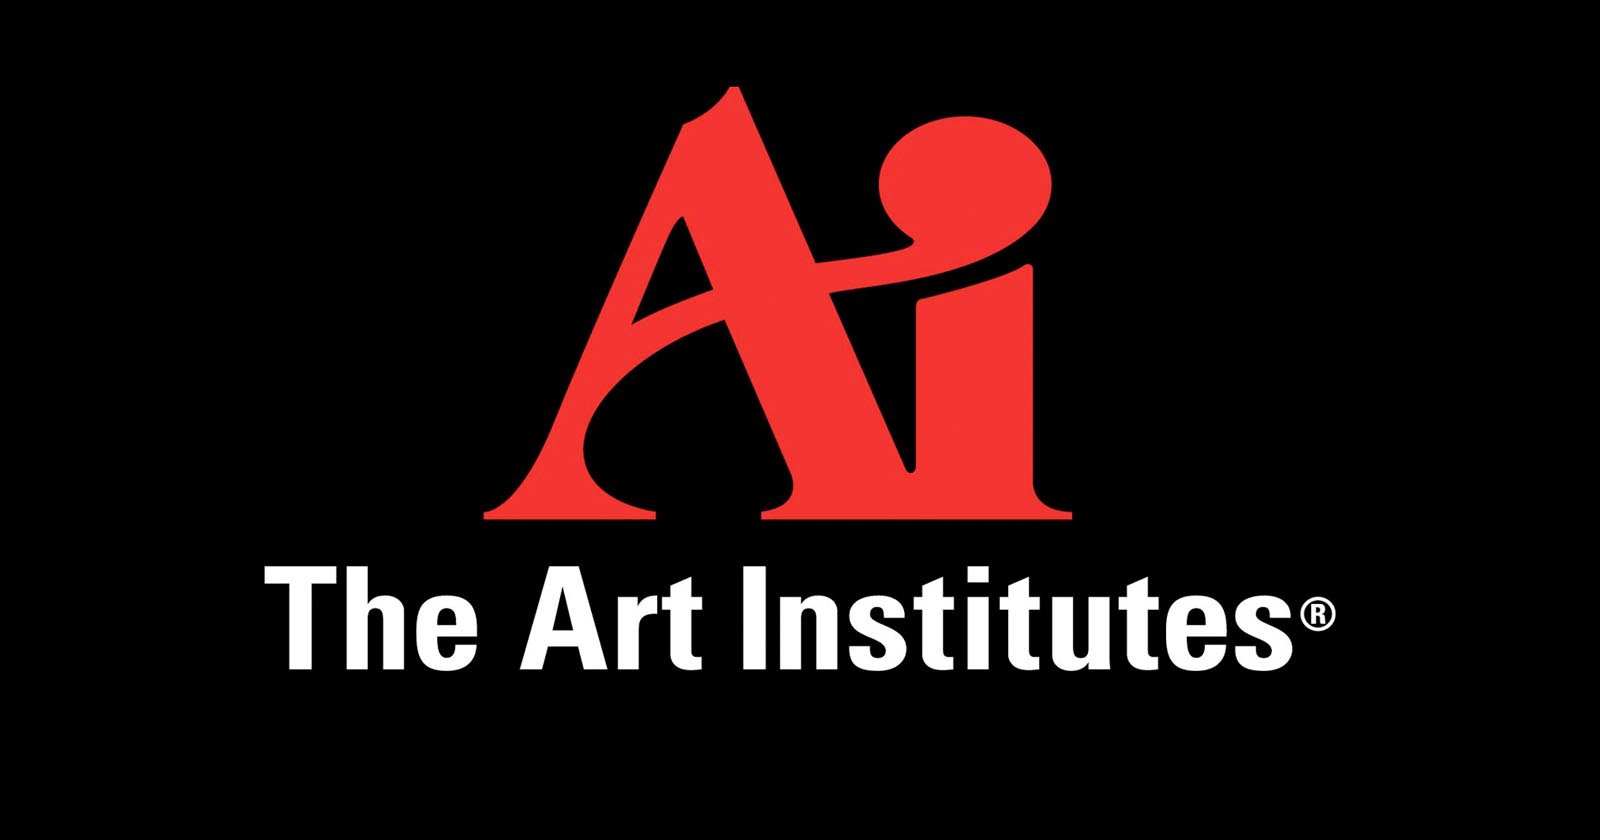 Logo of the art institutes featuring a stylized red ai symbol on a black background, with the text the art institutes underneath in white.